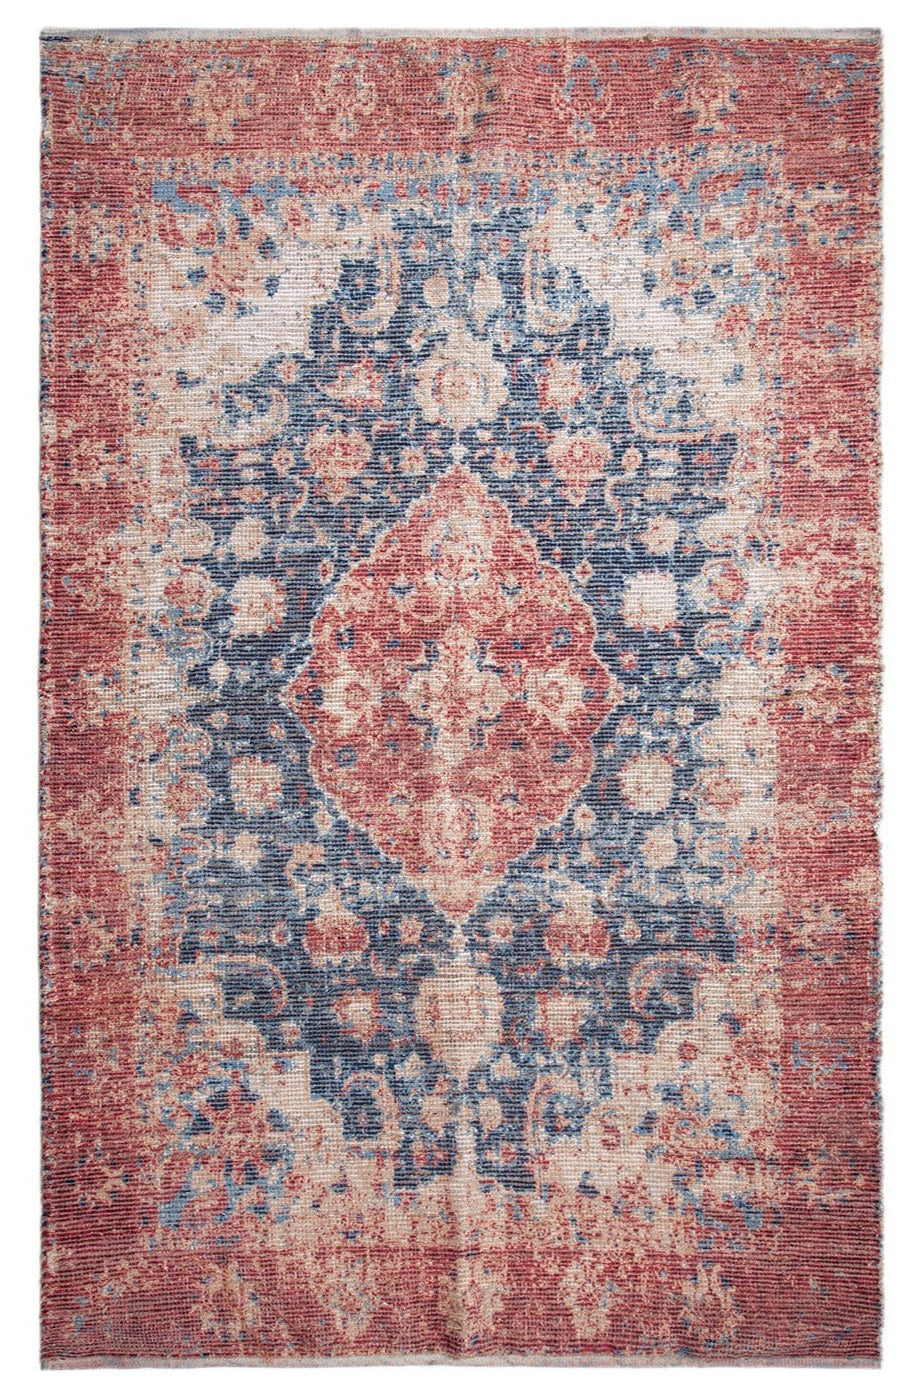 Klein Hand Woven Contemporary Transitional Jute Area Rug